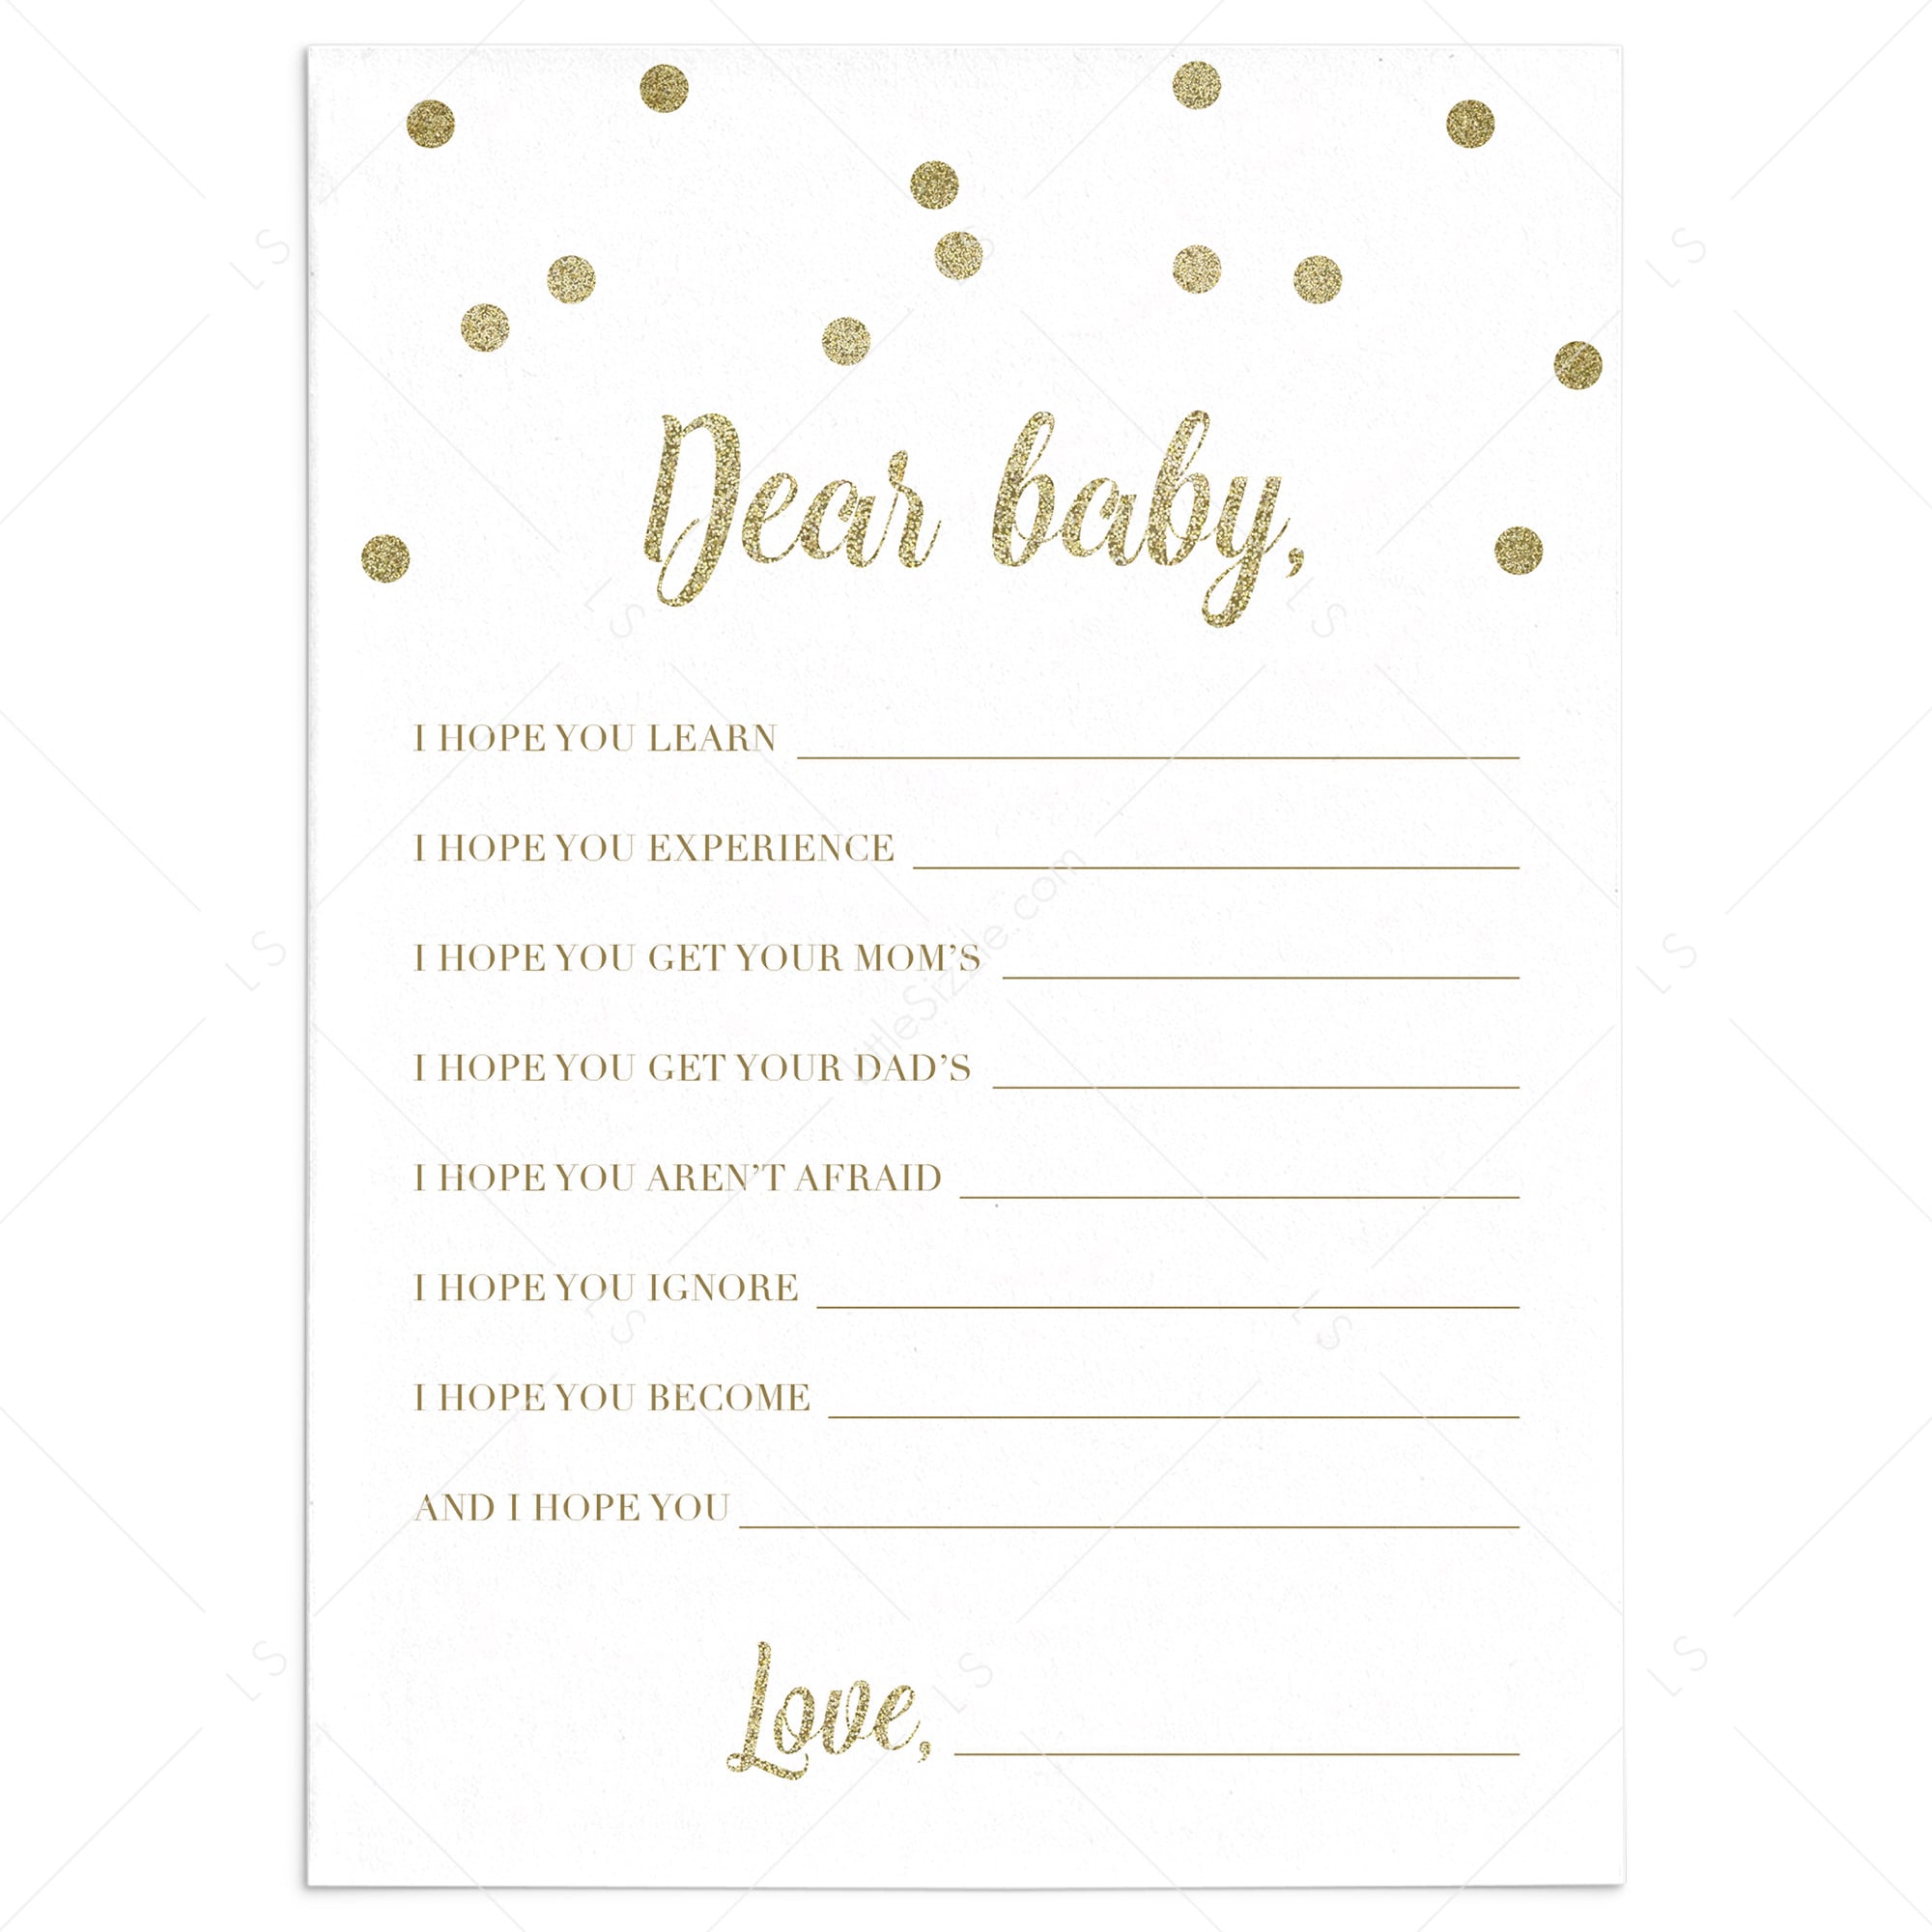 baby shower wishes card